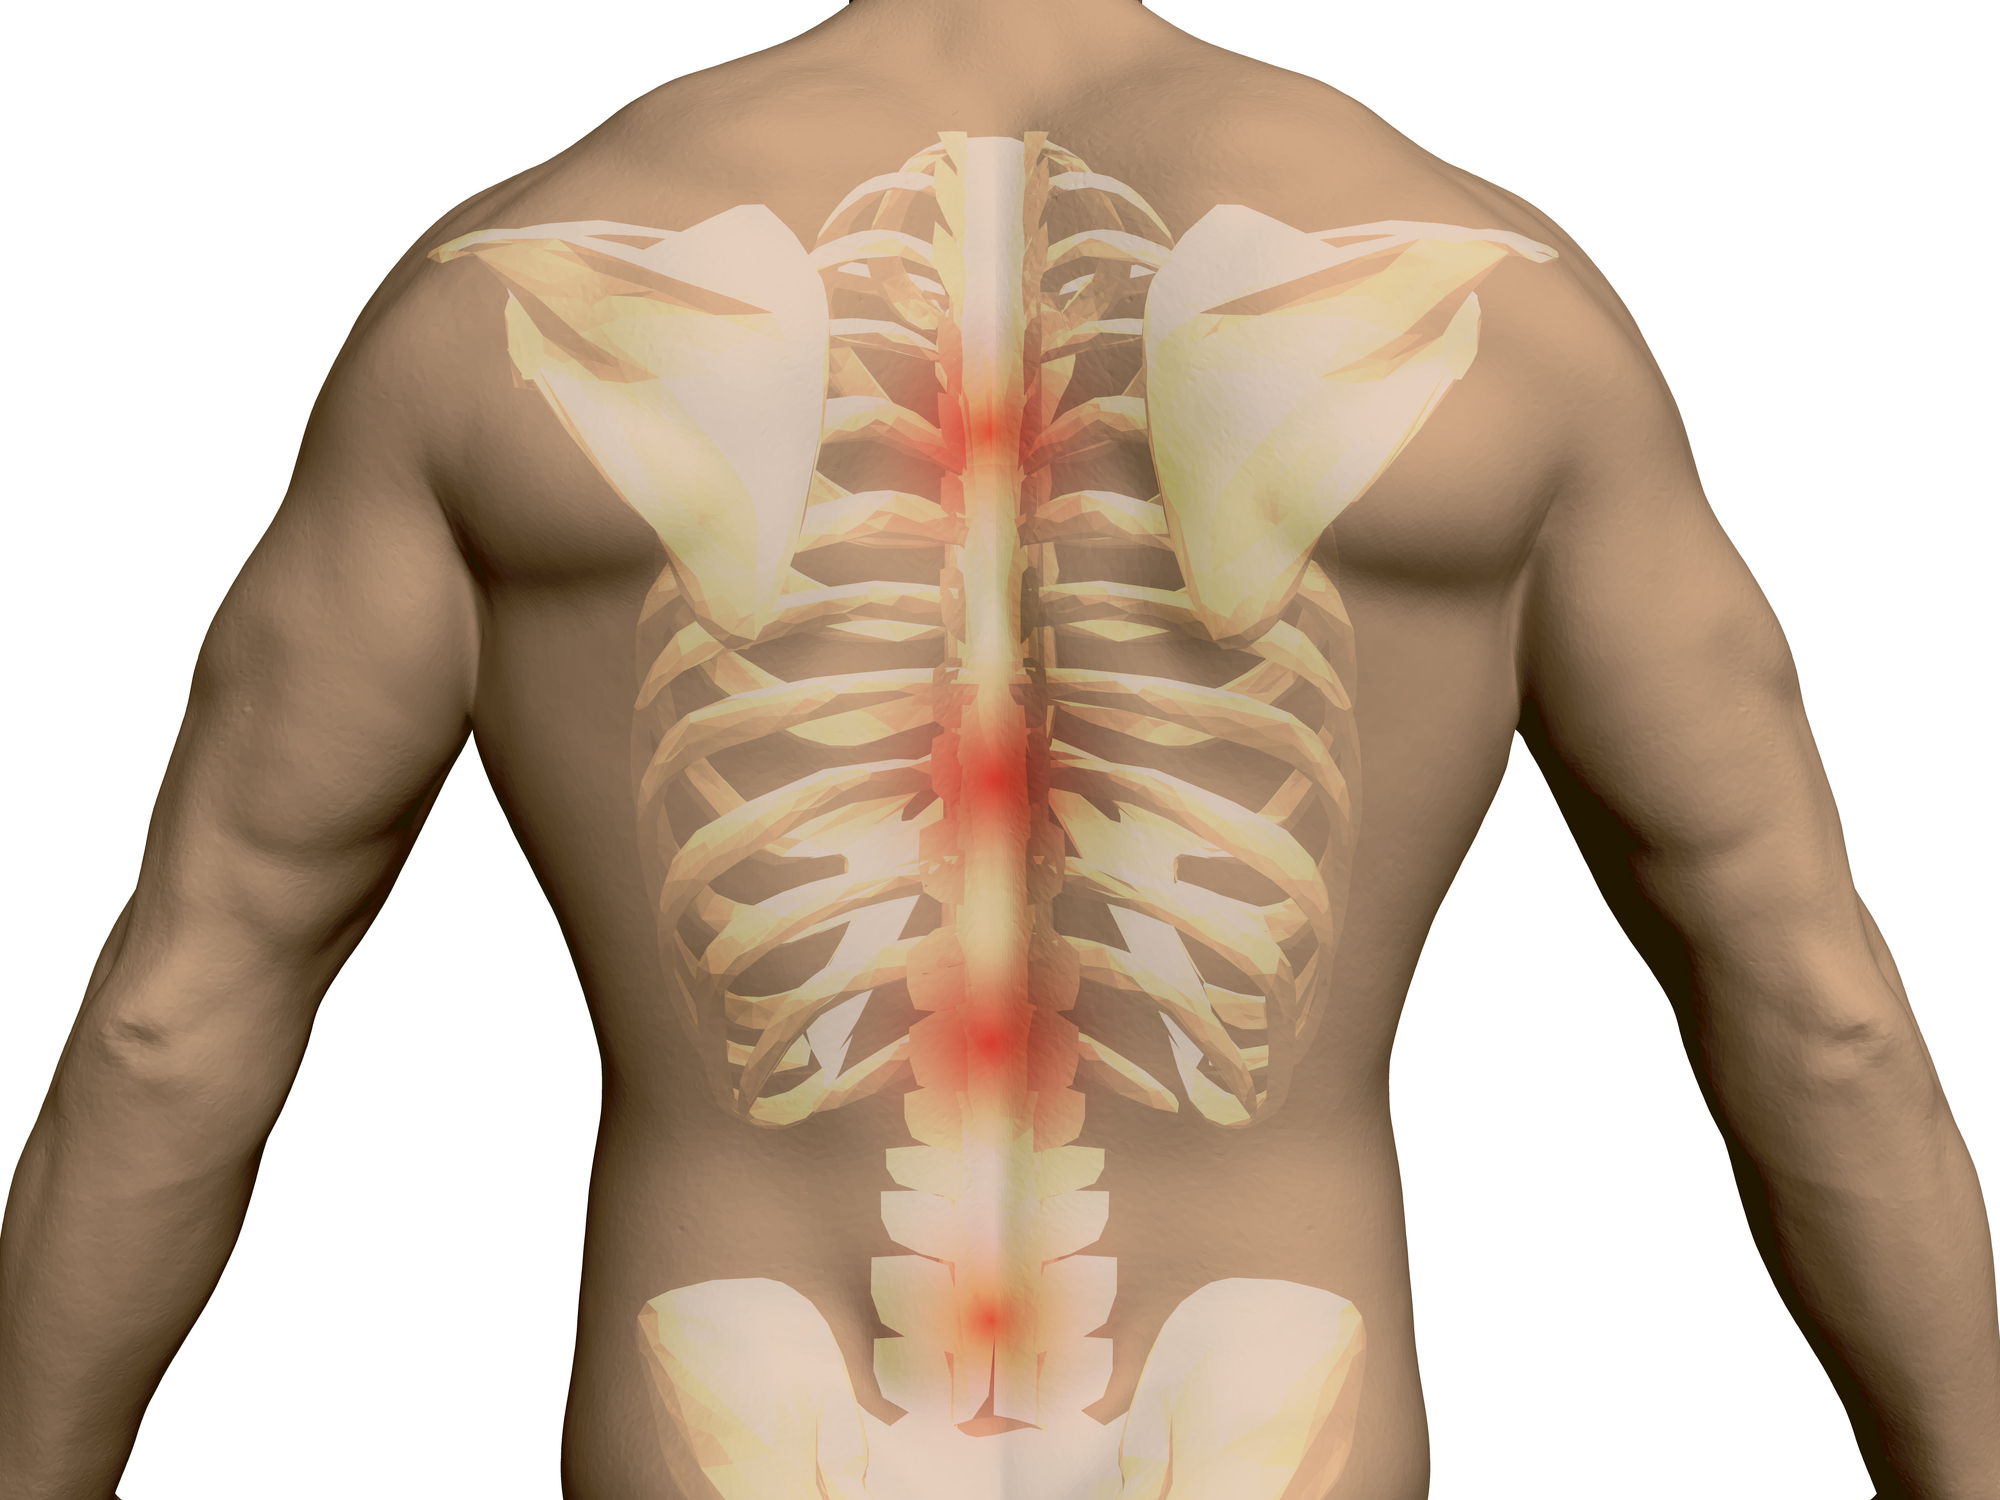 Strengthen Your Spine Through Special Treatment